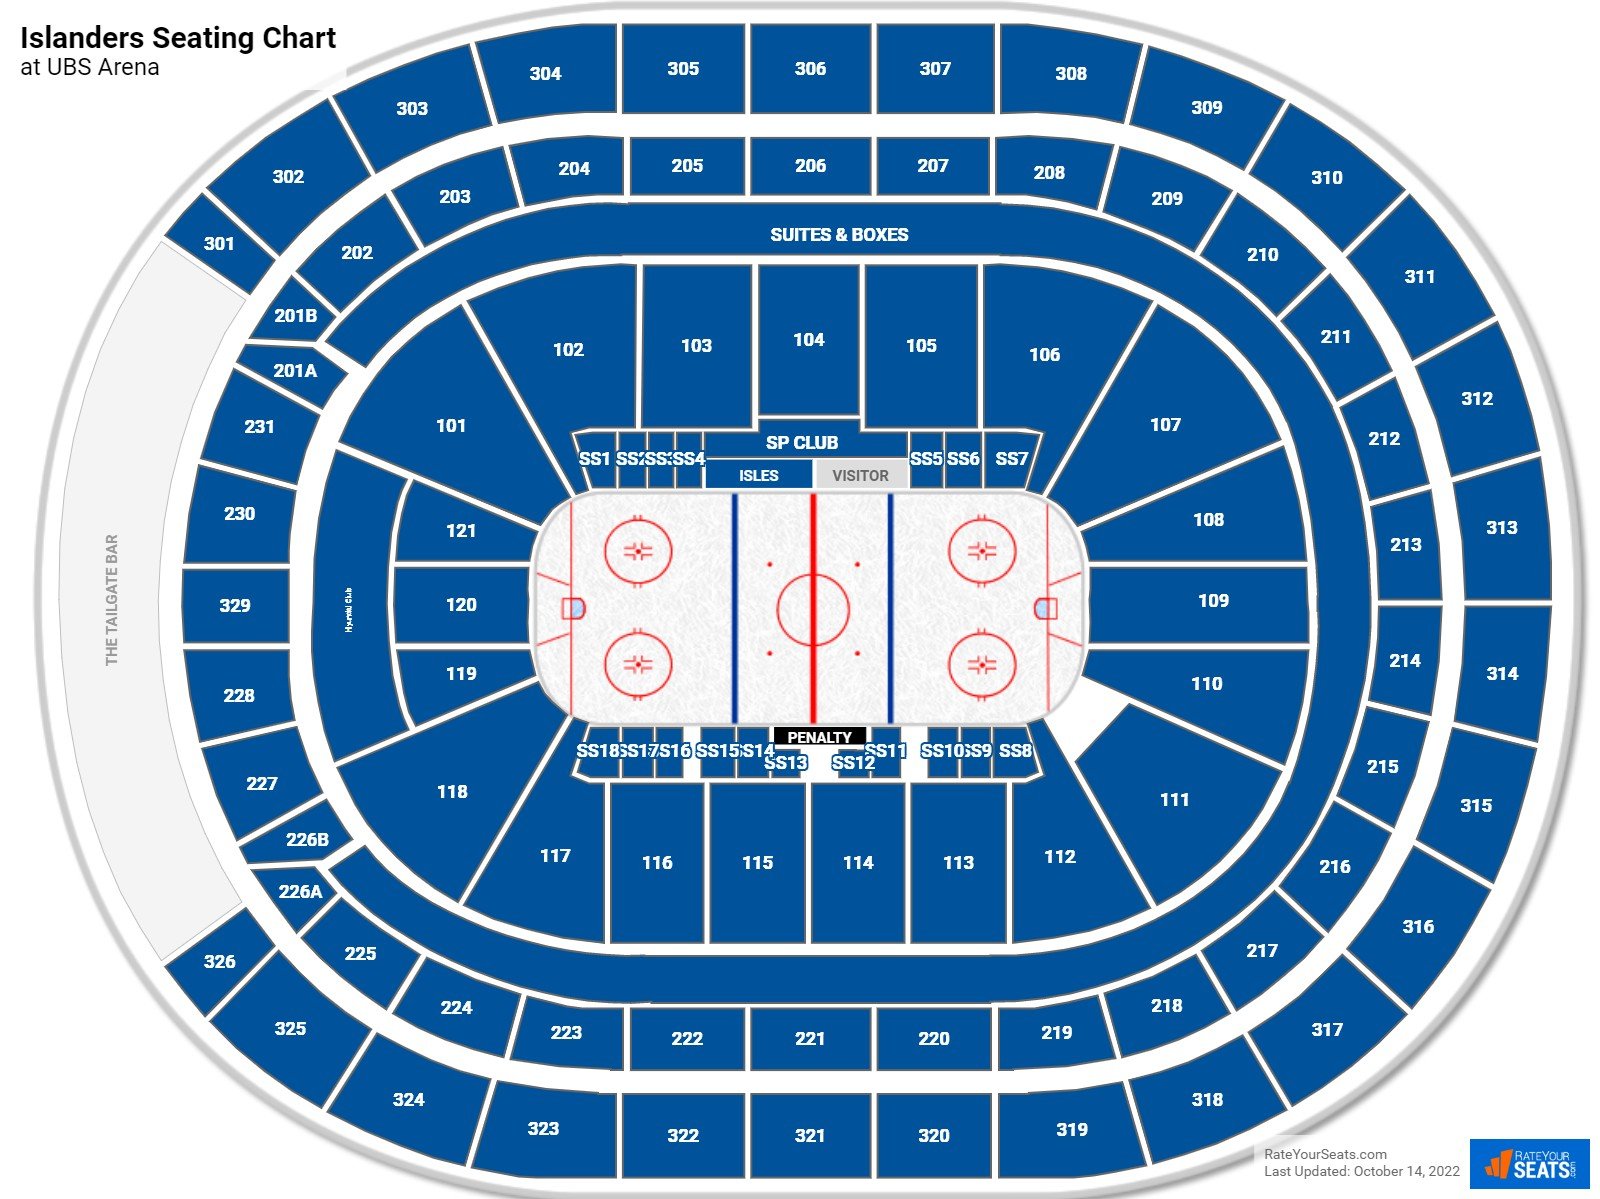 New York Islanders Seating Chart at UBS Arena